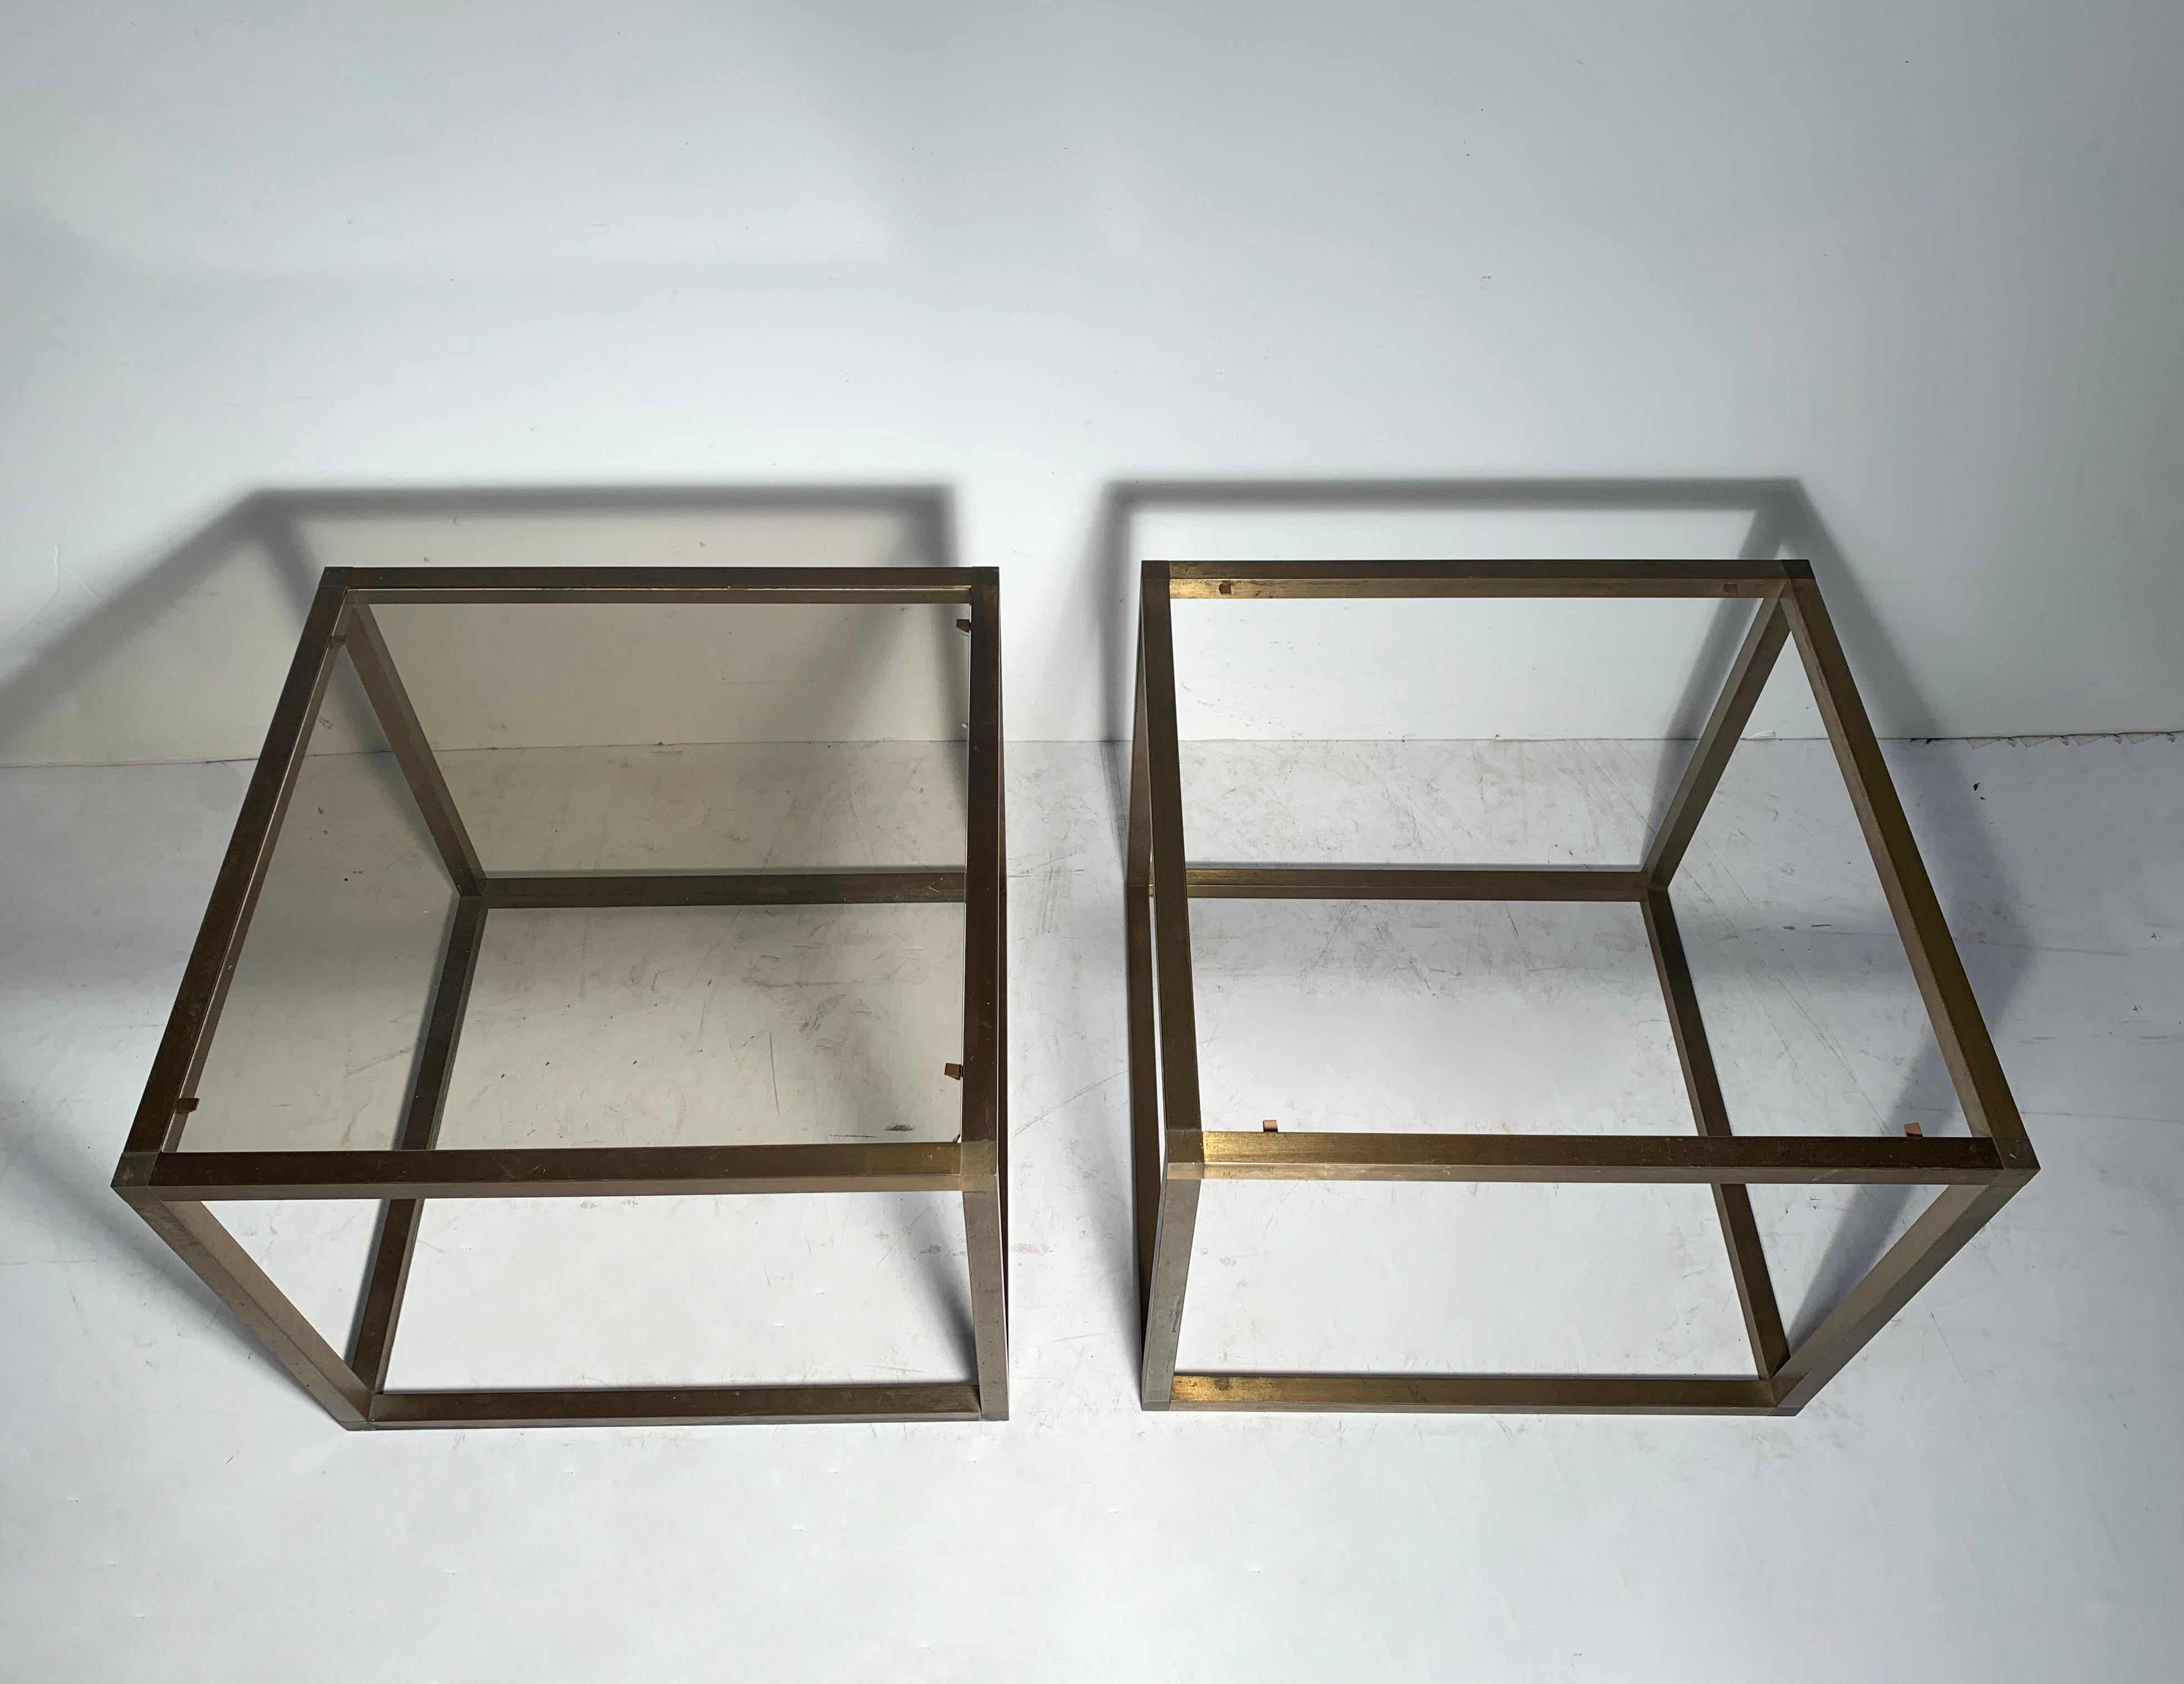 1960s-1970s bronzed extrusion tables with tinted glass. In the manner of Milo Baughman. Possibly Italian.


1 piece of glass has some damage by one corner and some scratches. may want to replace. 
Wear/patina to the finish on the metal with some